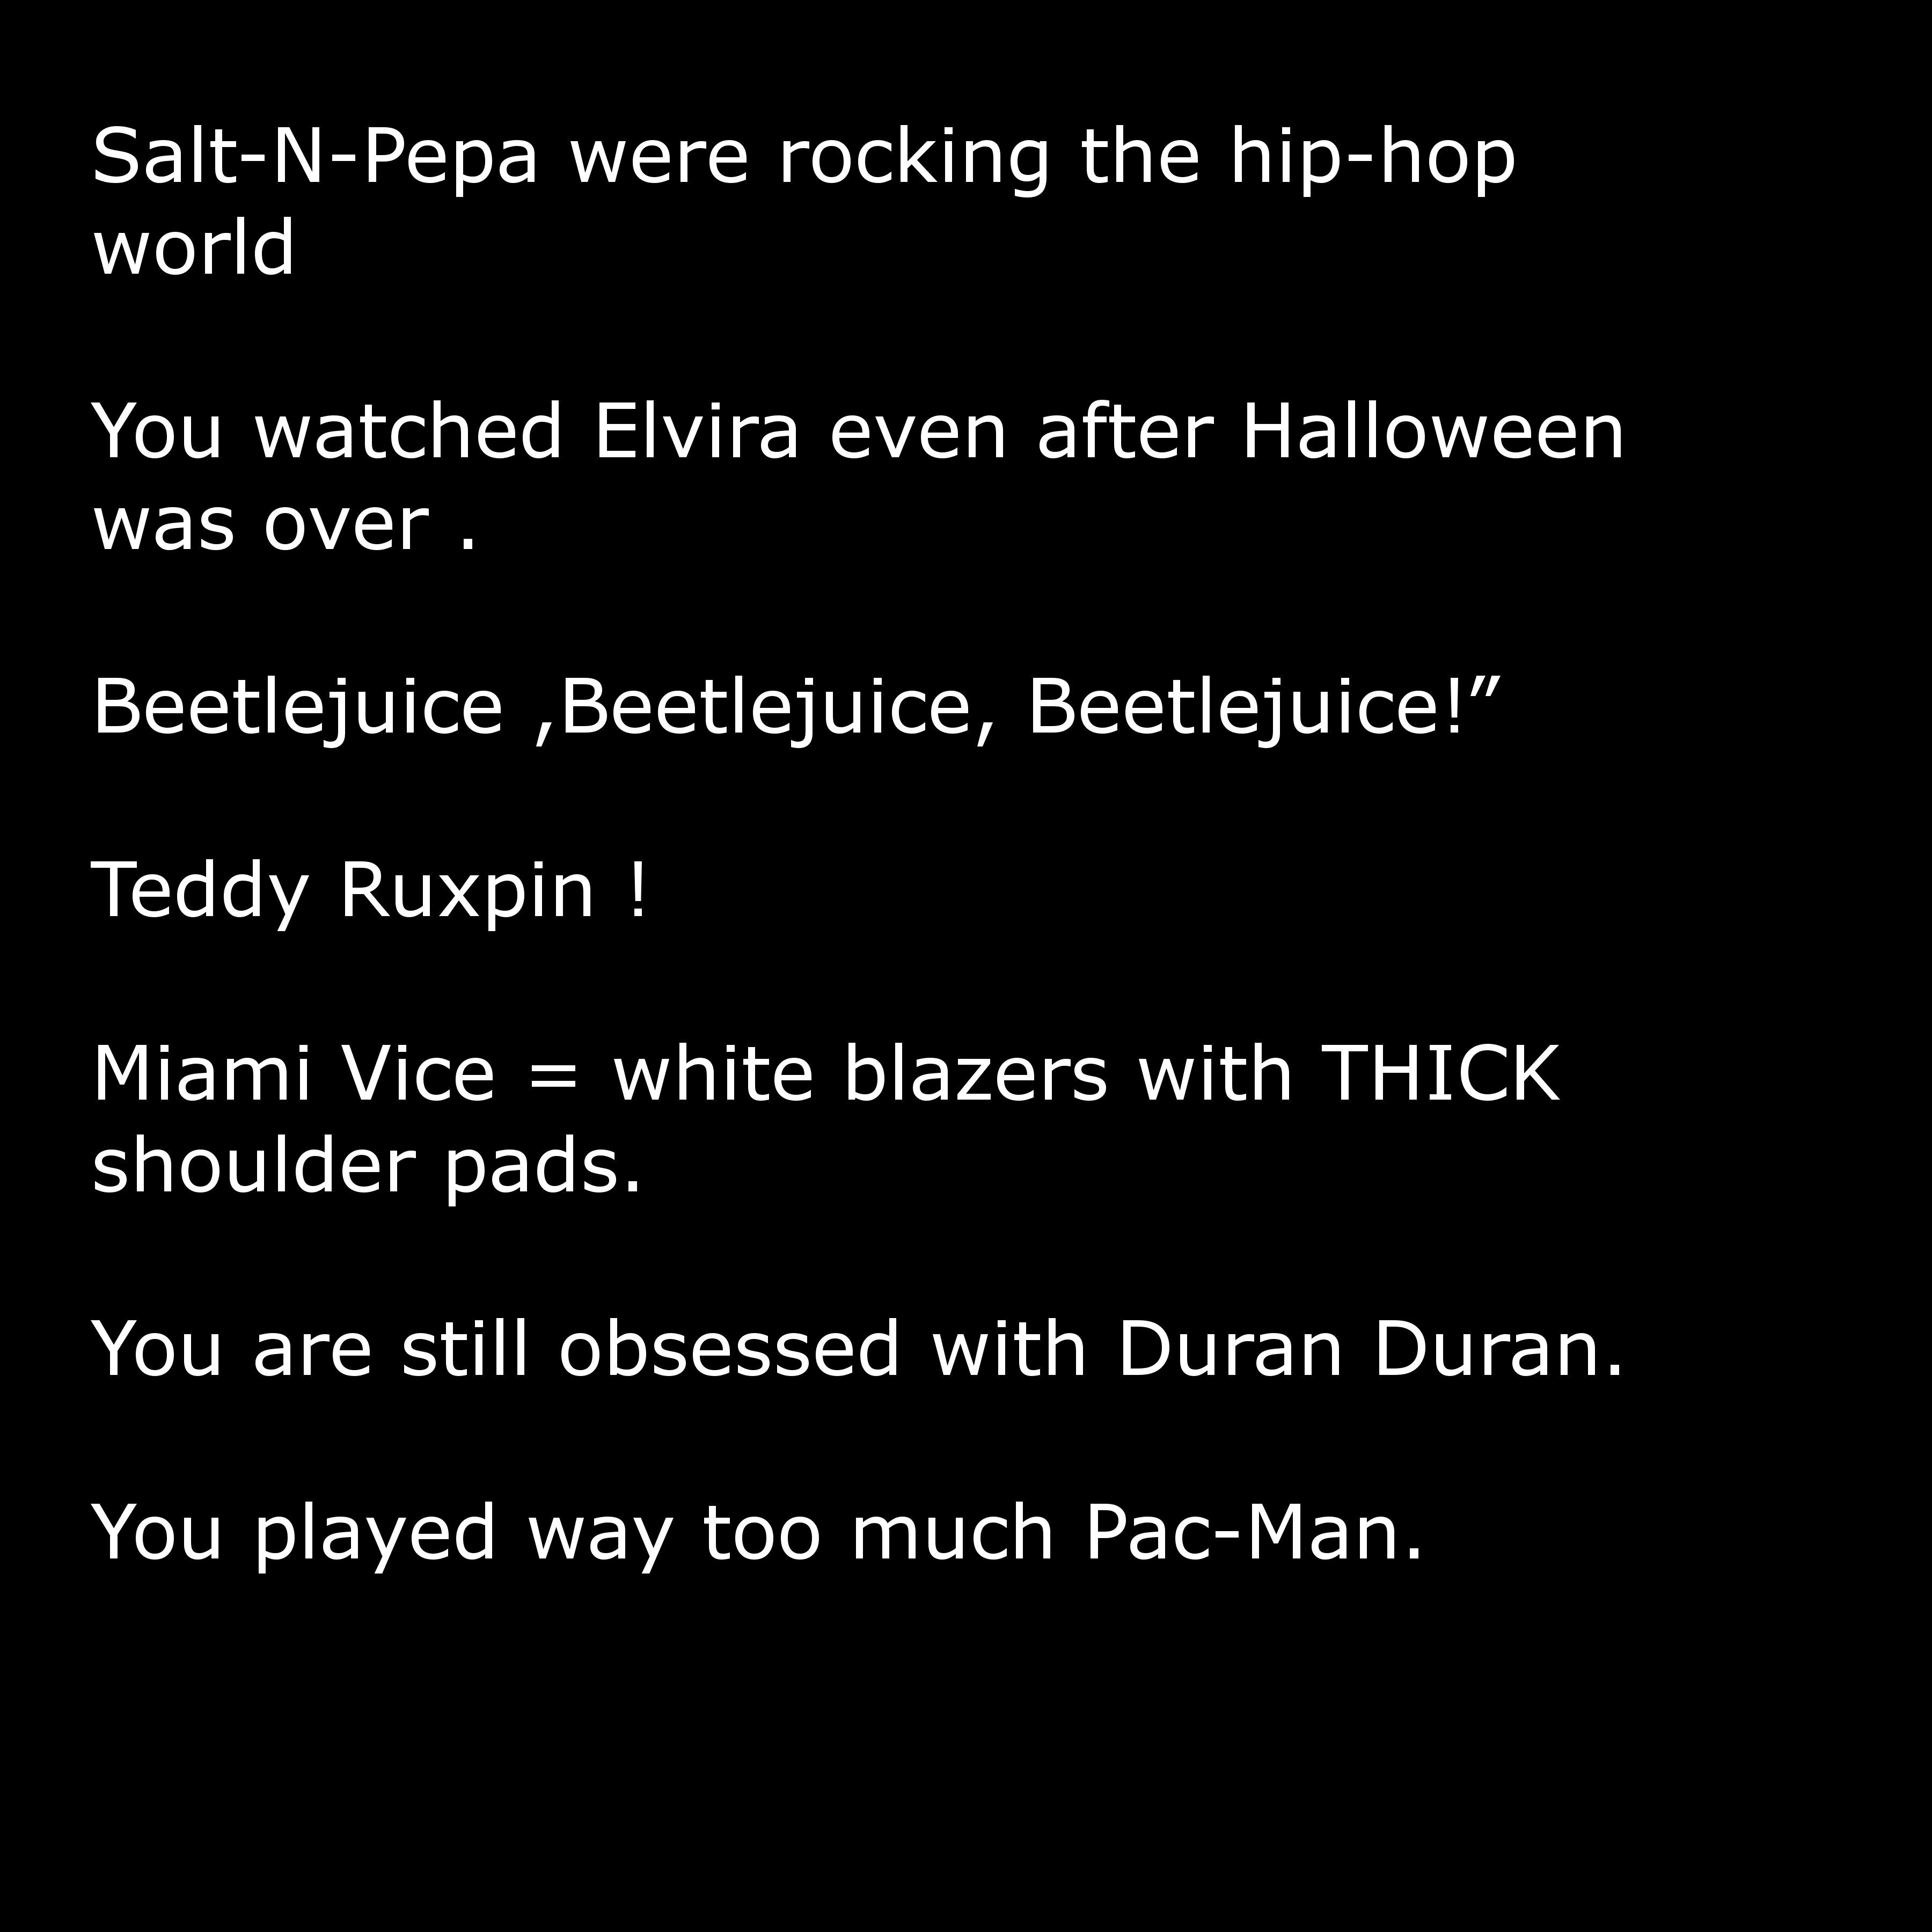 angle - SaltNPepa were rocking the hiphop world You watched Elvira even after Halloween was over. Beetlejuice ,Beetlejuice, Beetlejuice!" Teddy Ruxpin ! Miami Vice white blazers with Thick shoulder pads. You are still obsessed with Duran Duran. You played